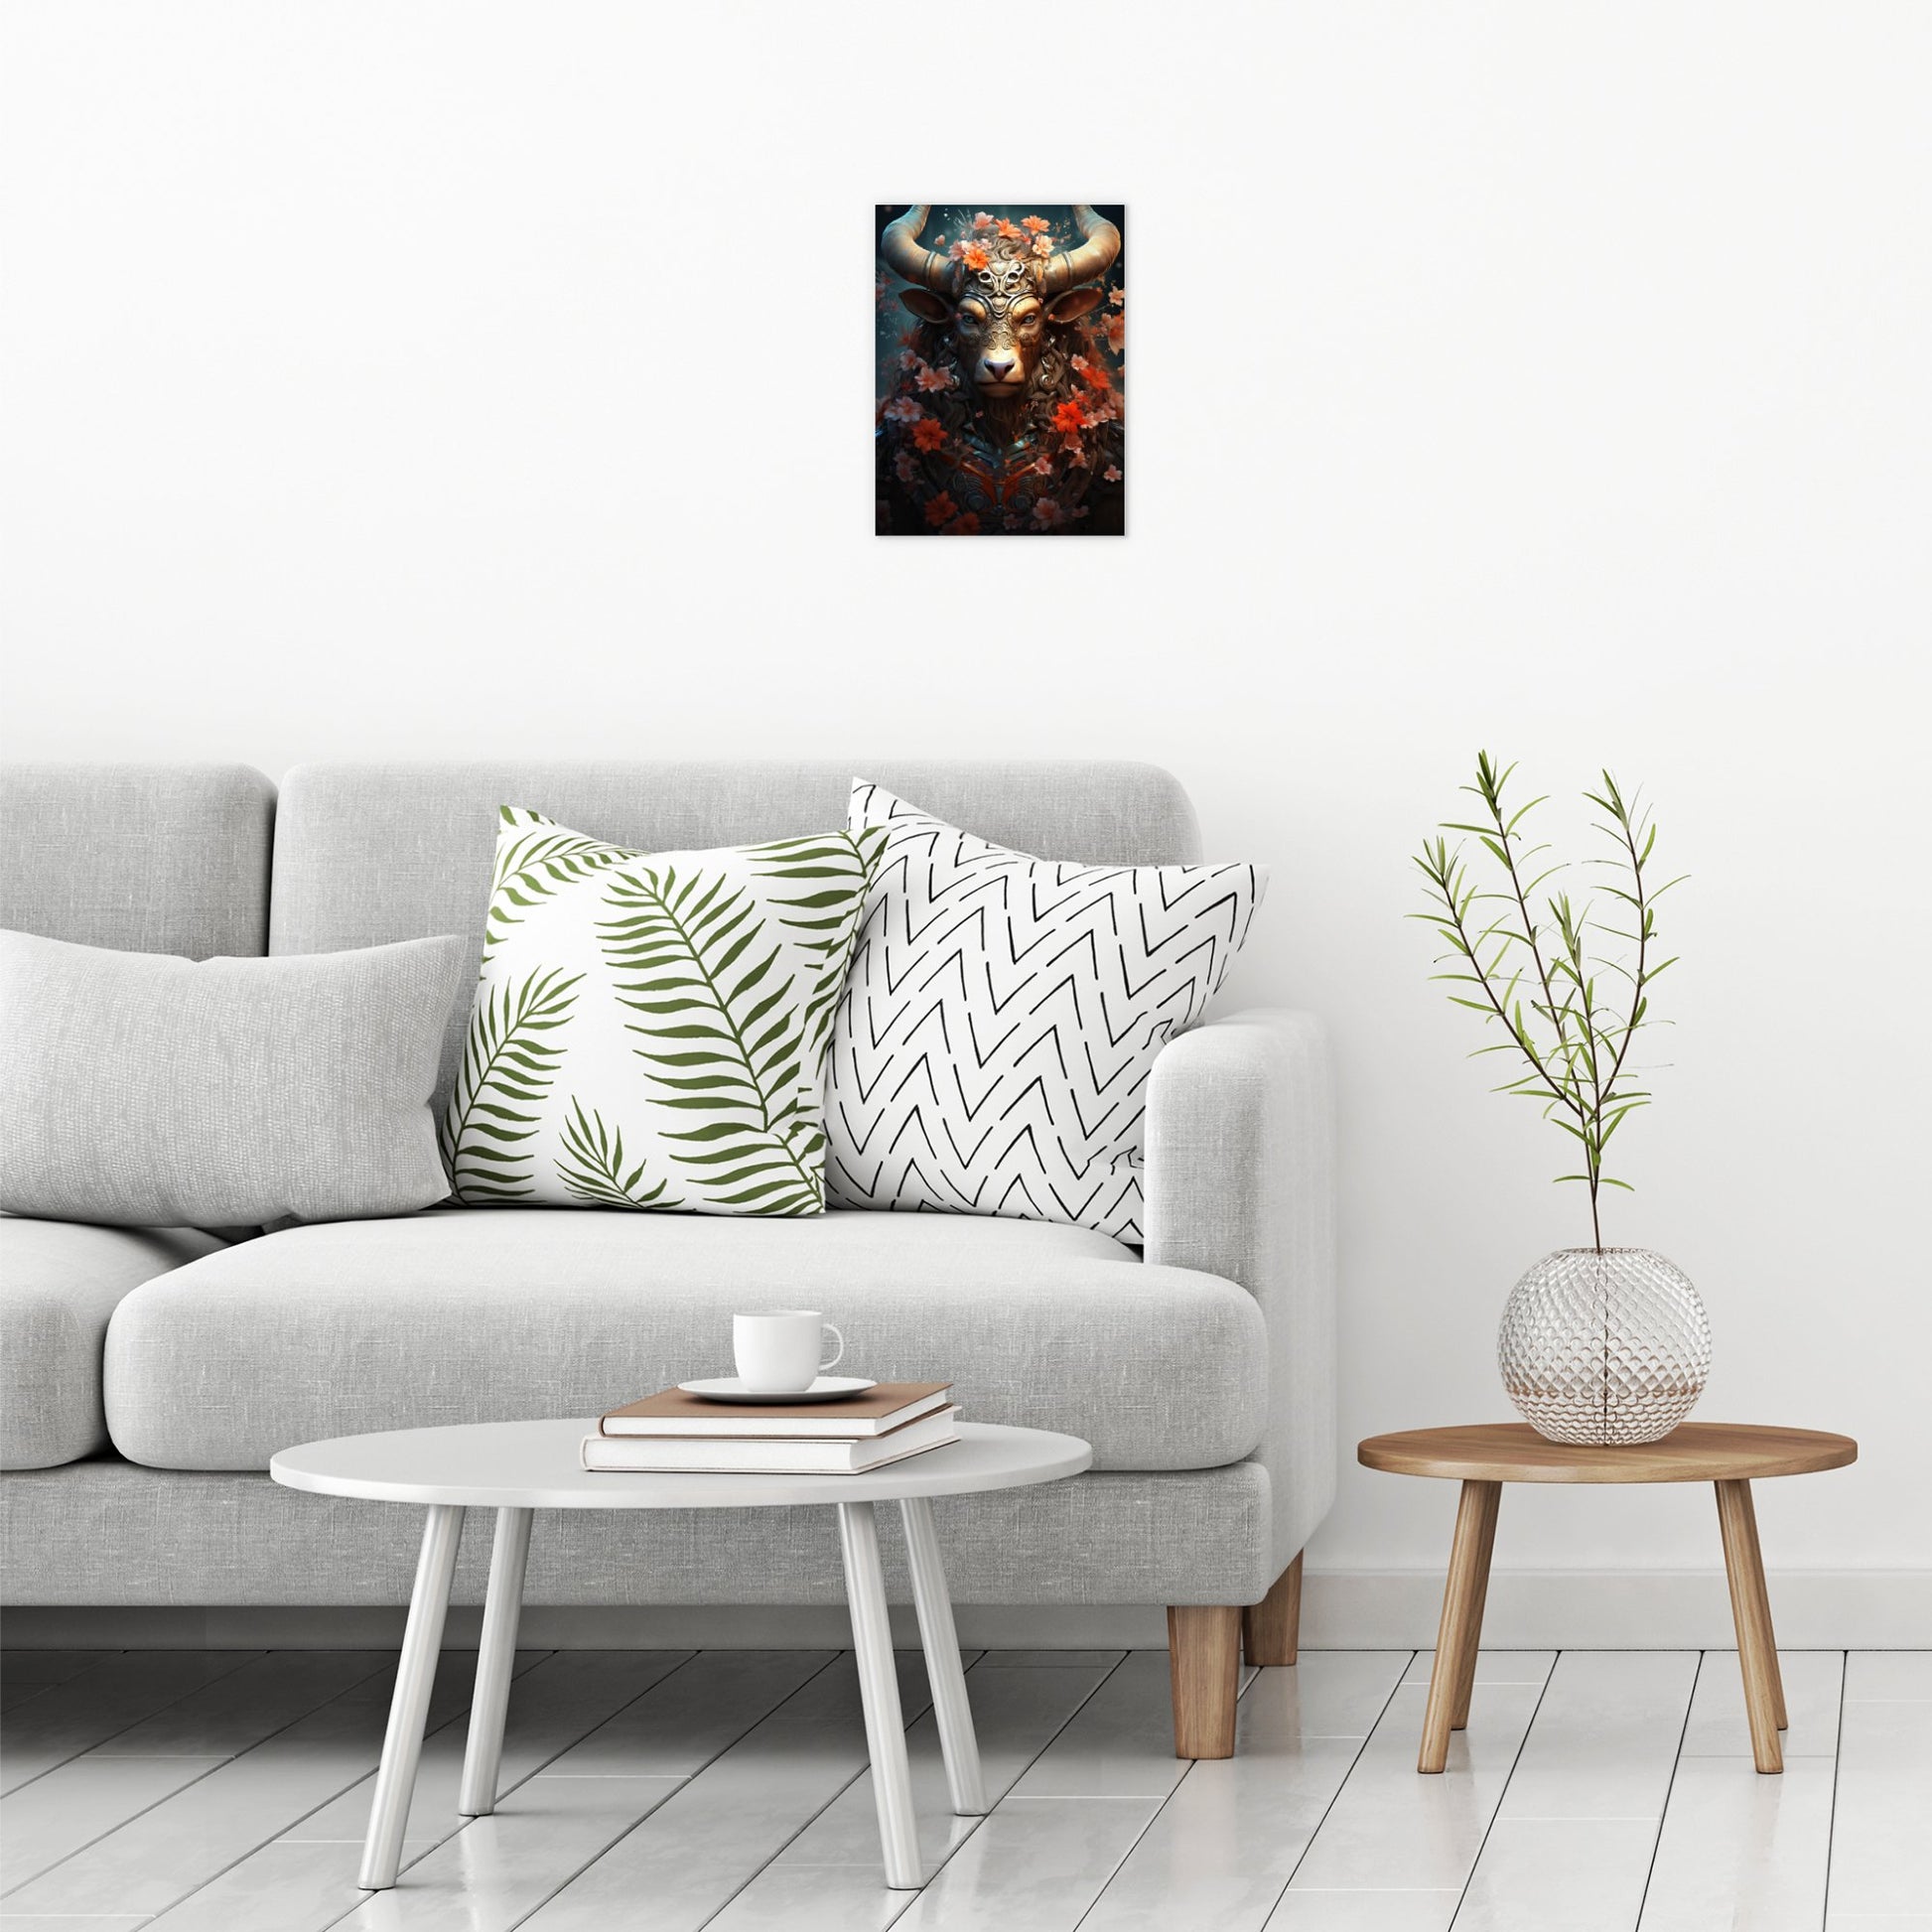 A contemporary modern room view showing a small size metal art poster display plate with printed design of a Magical Minotaur Fantasy Painting